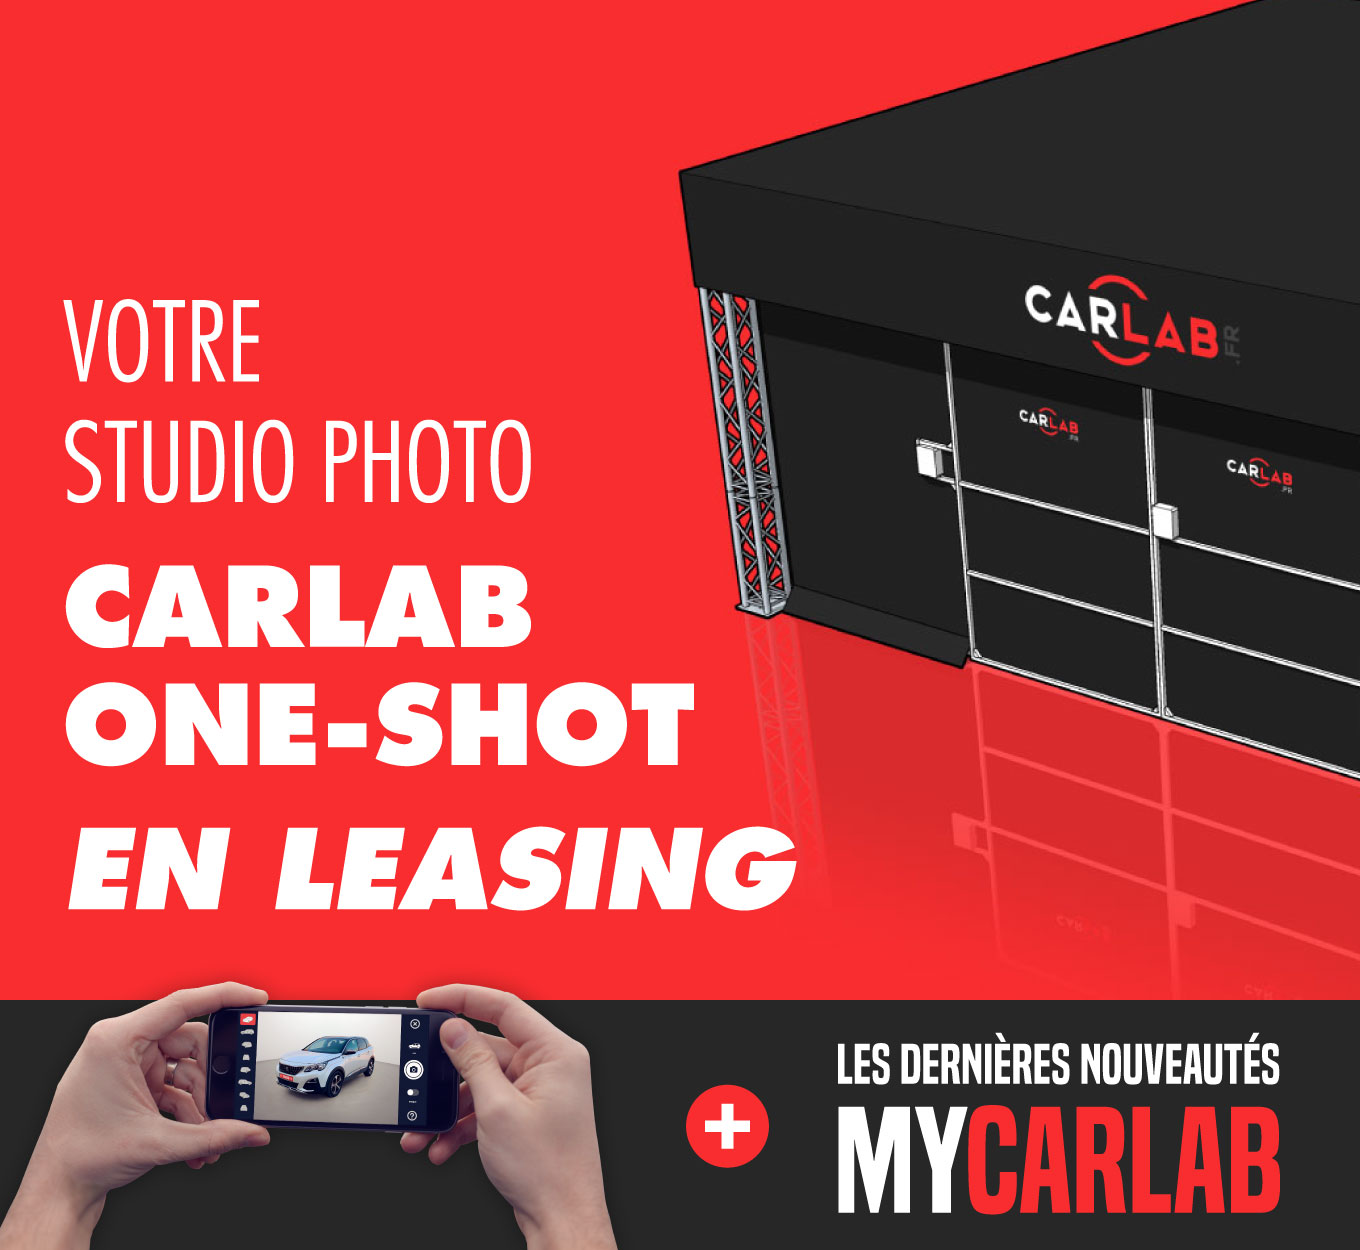 img banner carlab one-shot studio photo voiture leasing et nouveautés mycarlab video one-to-one